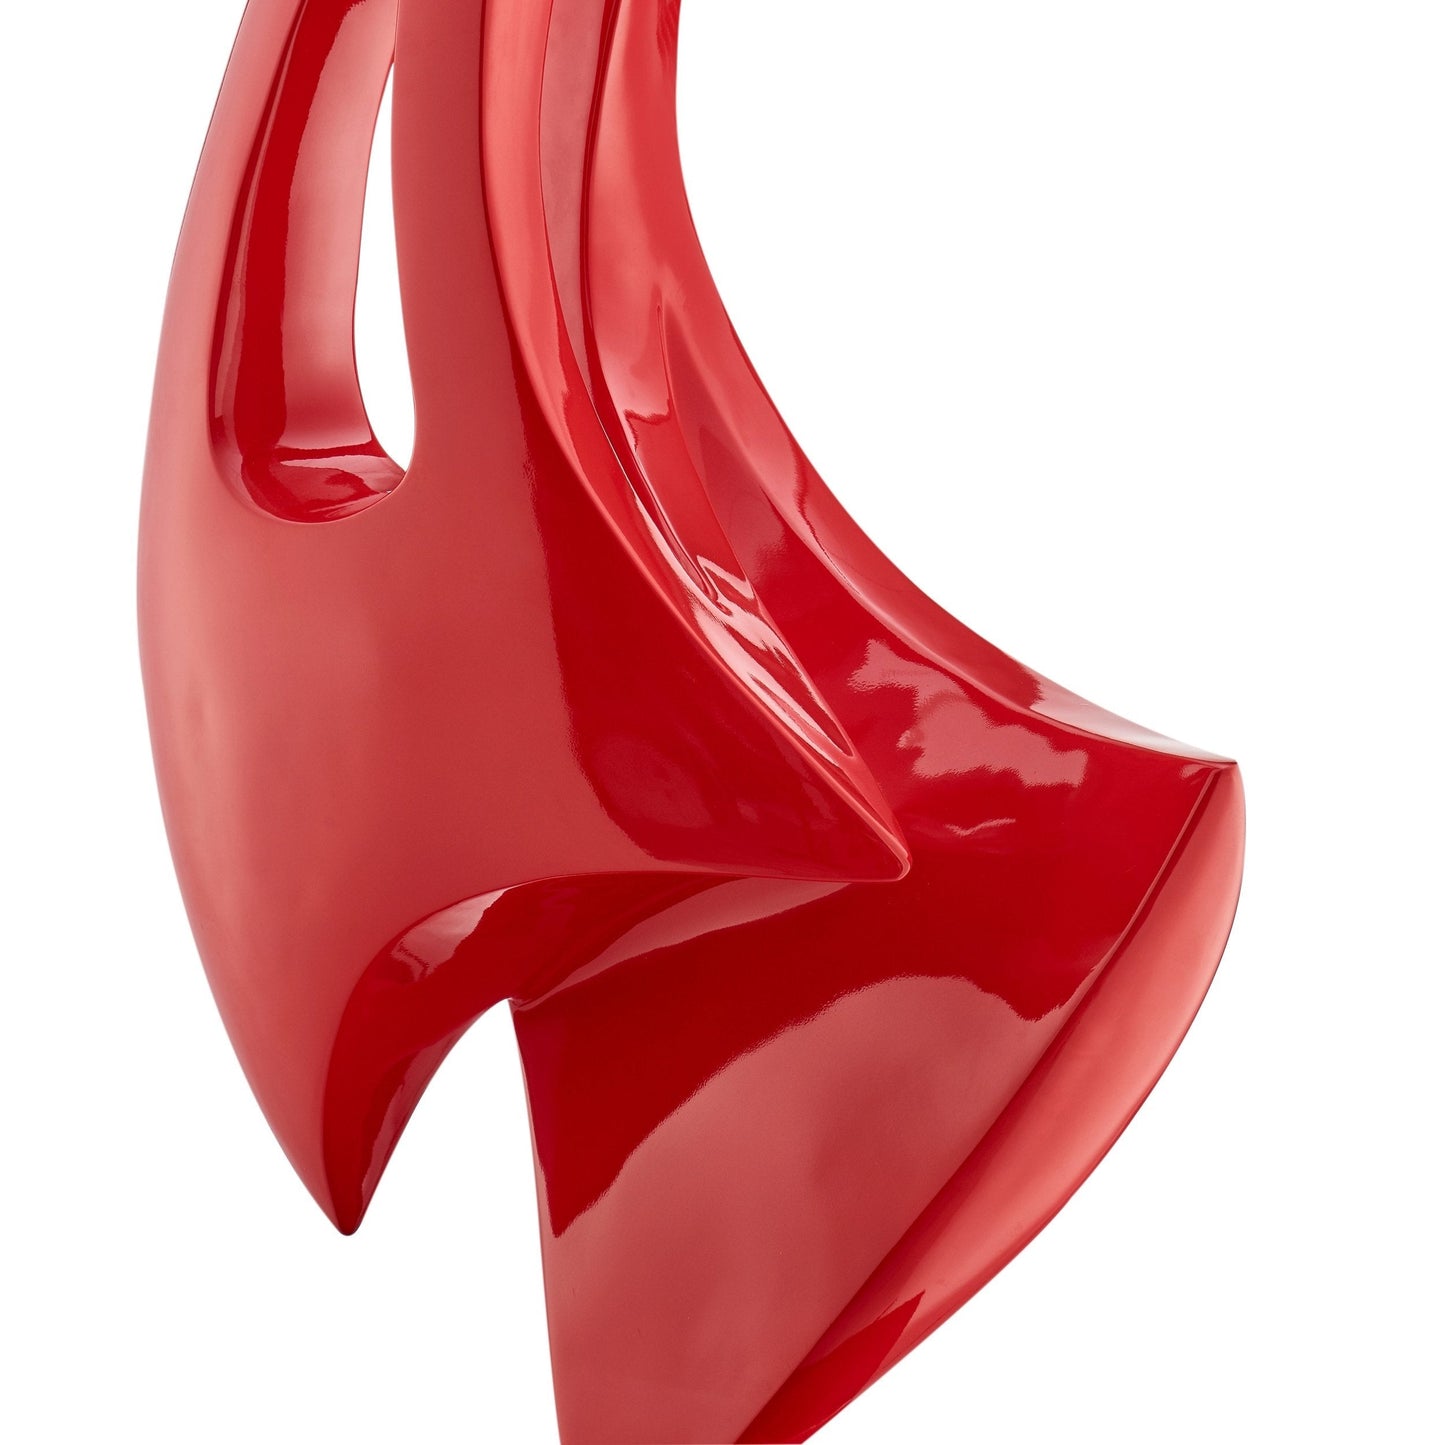 SAIL 70" Red Floor Sculpture With Black Stand